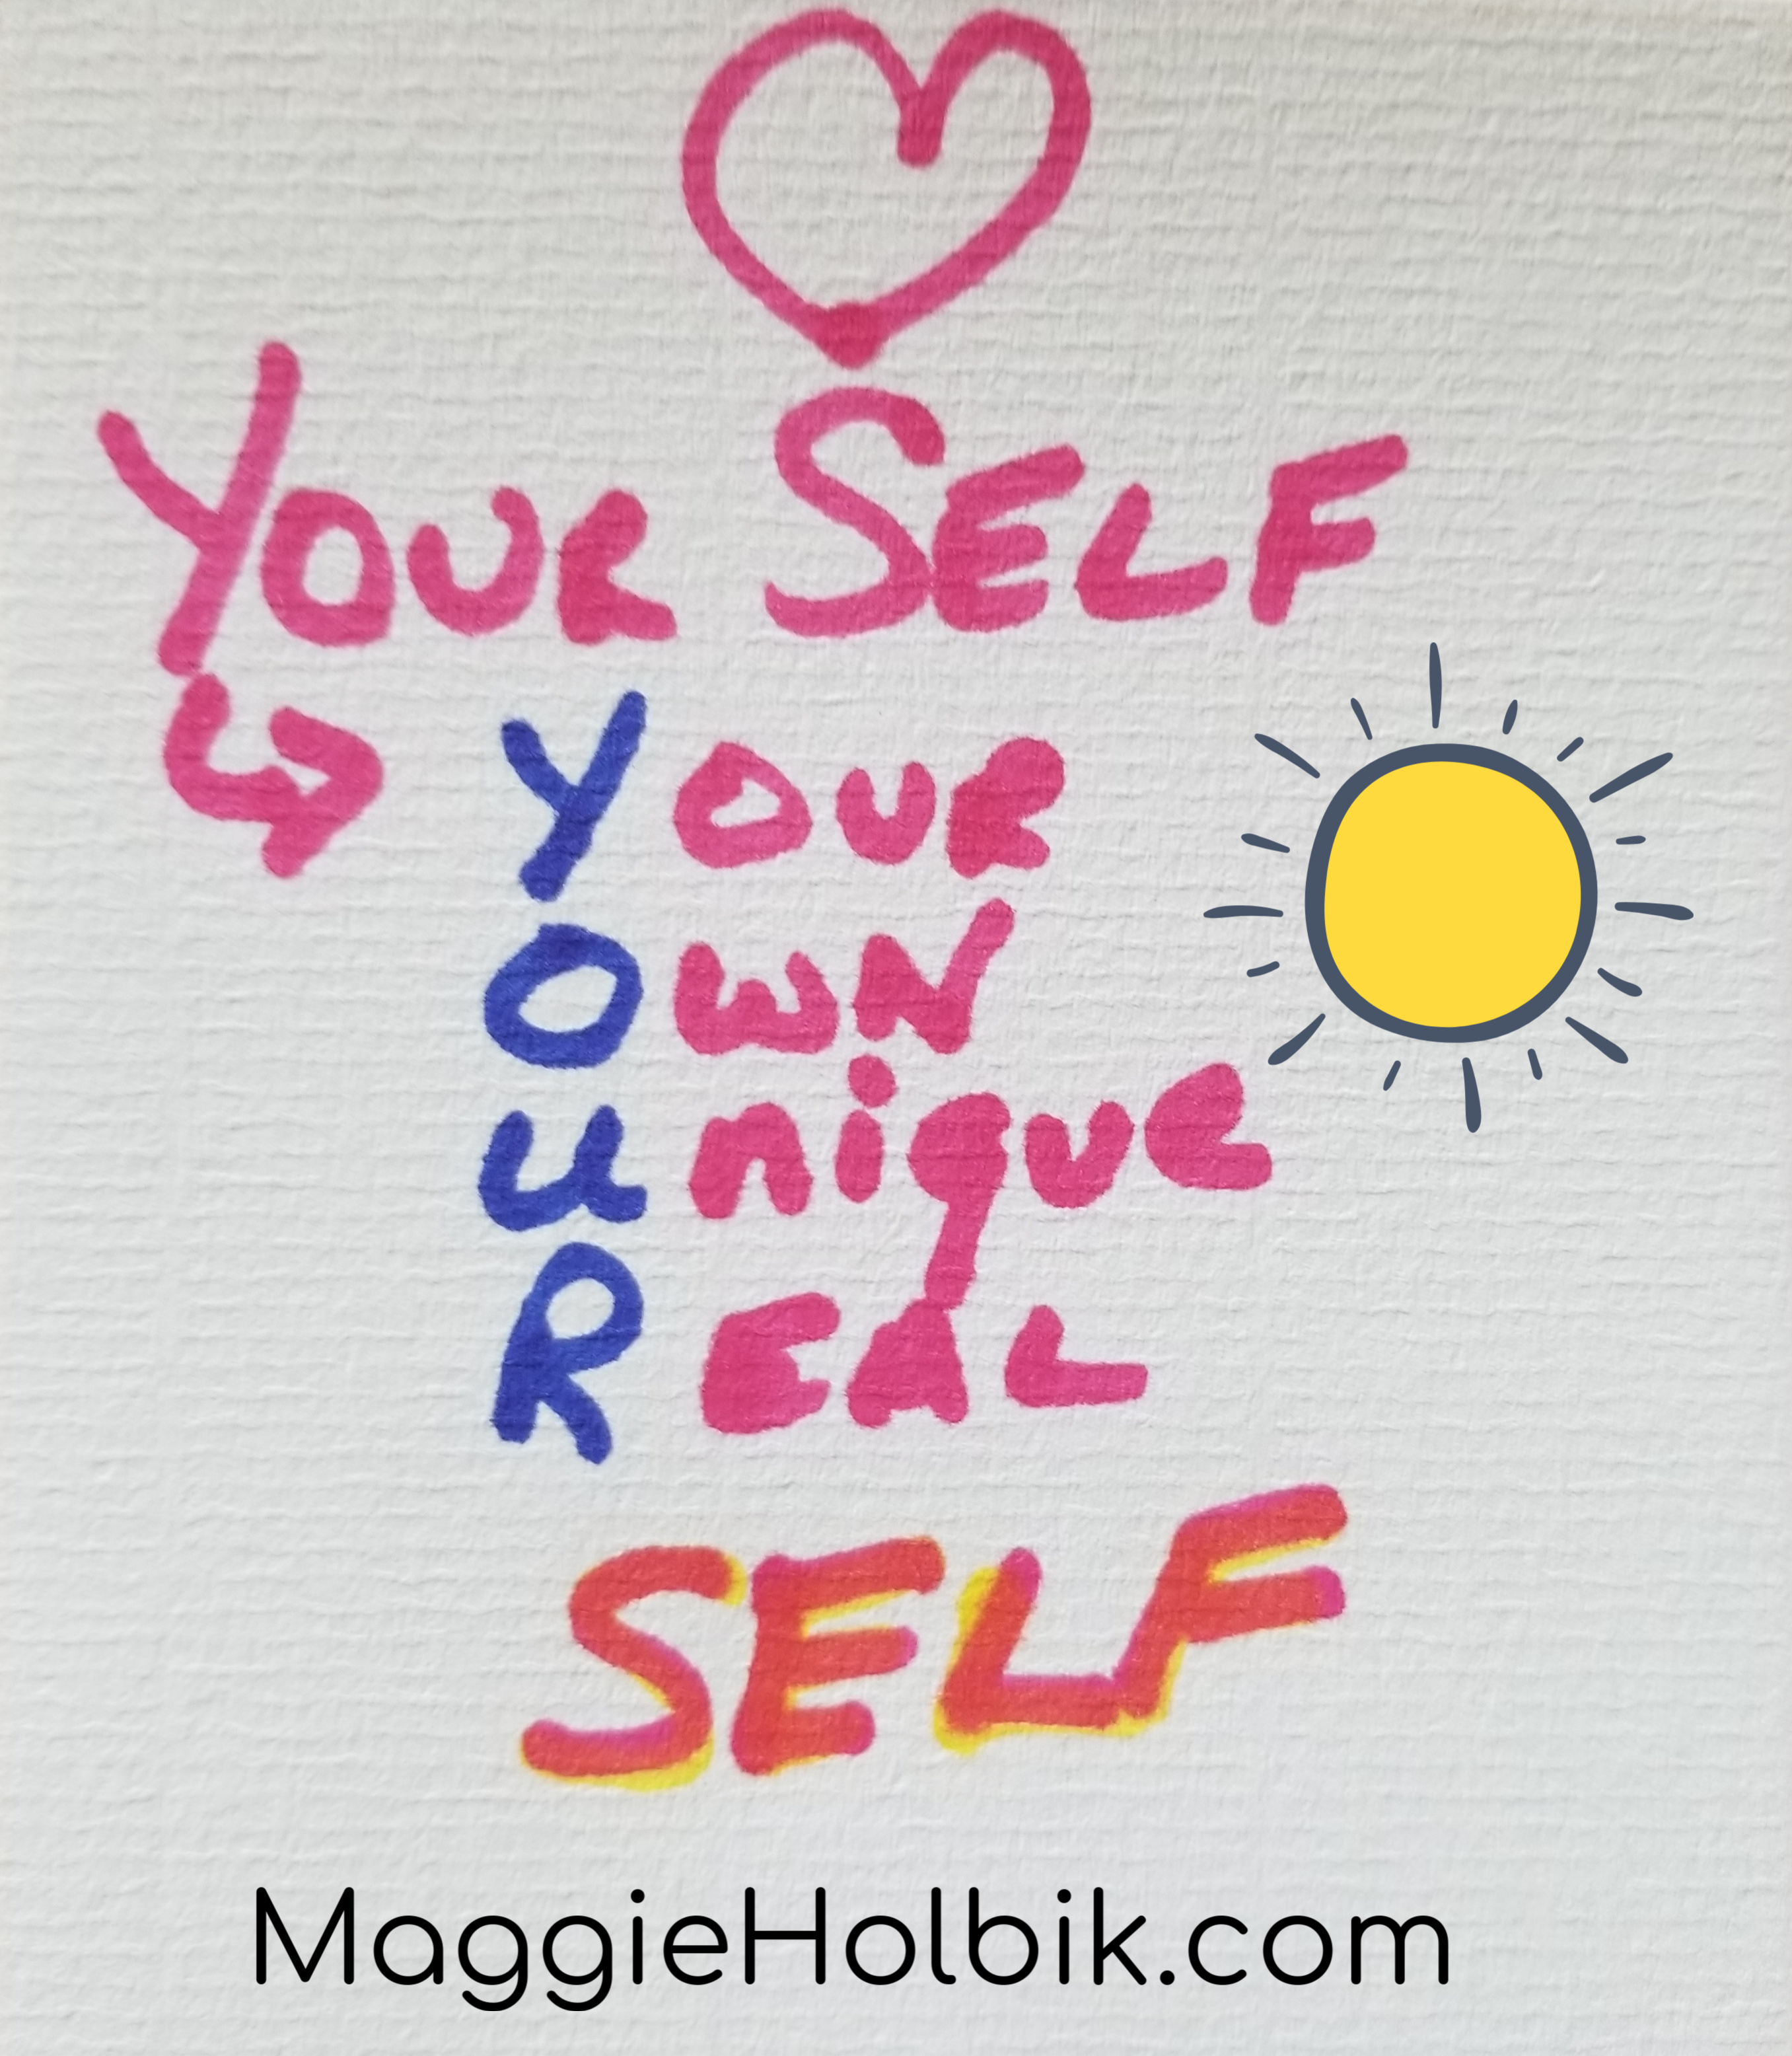 Be Yourself by Maggie Holbik.com
